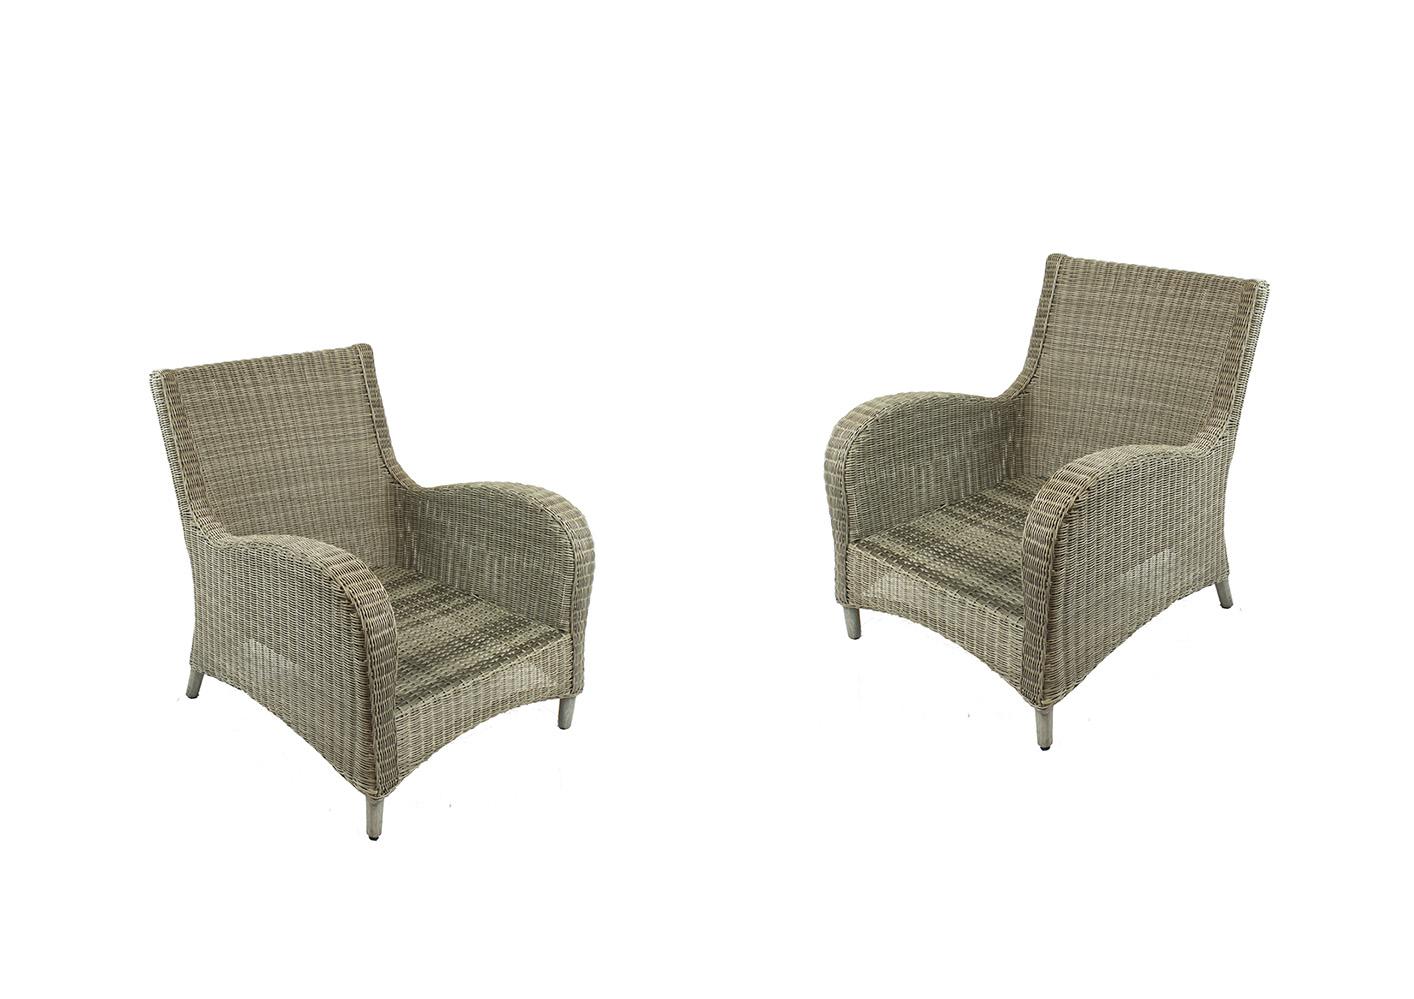 Contemporary Patio Club Chair Athena ATCC-Set-2 in Natural, Gray Wicker